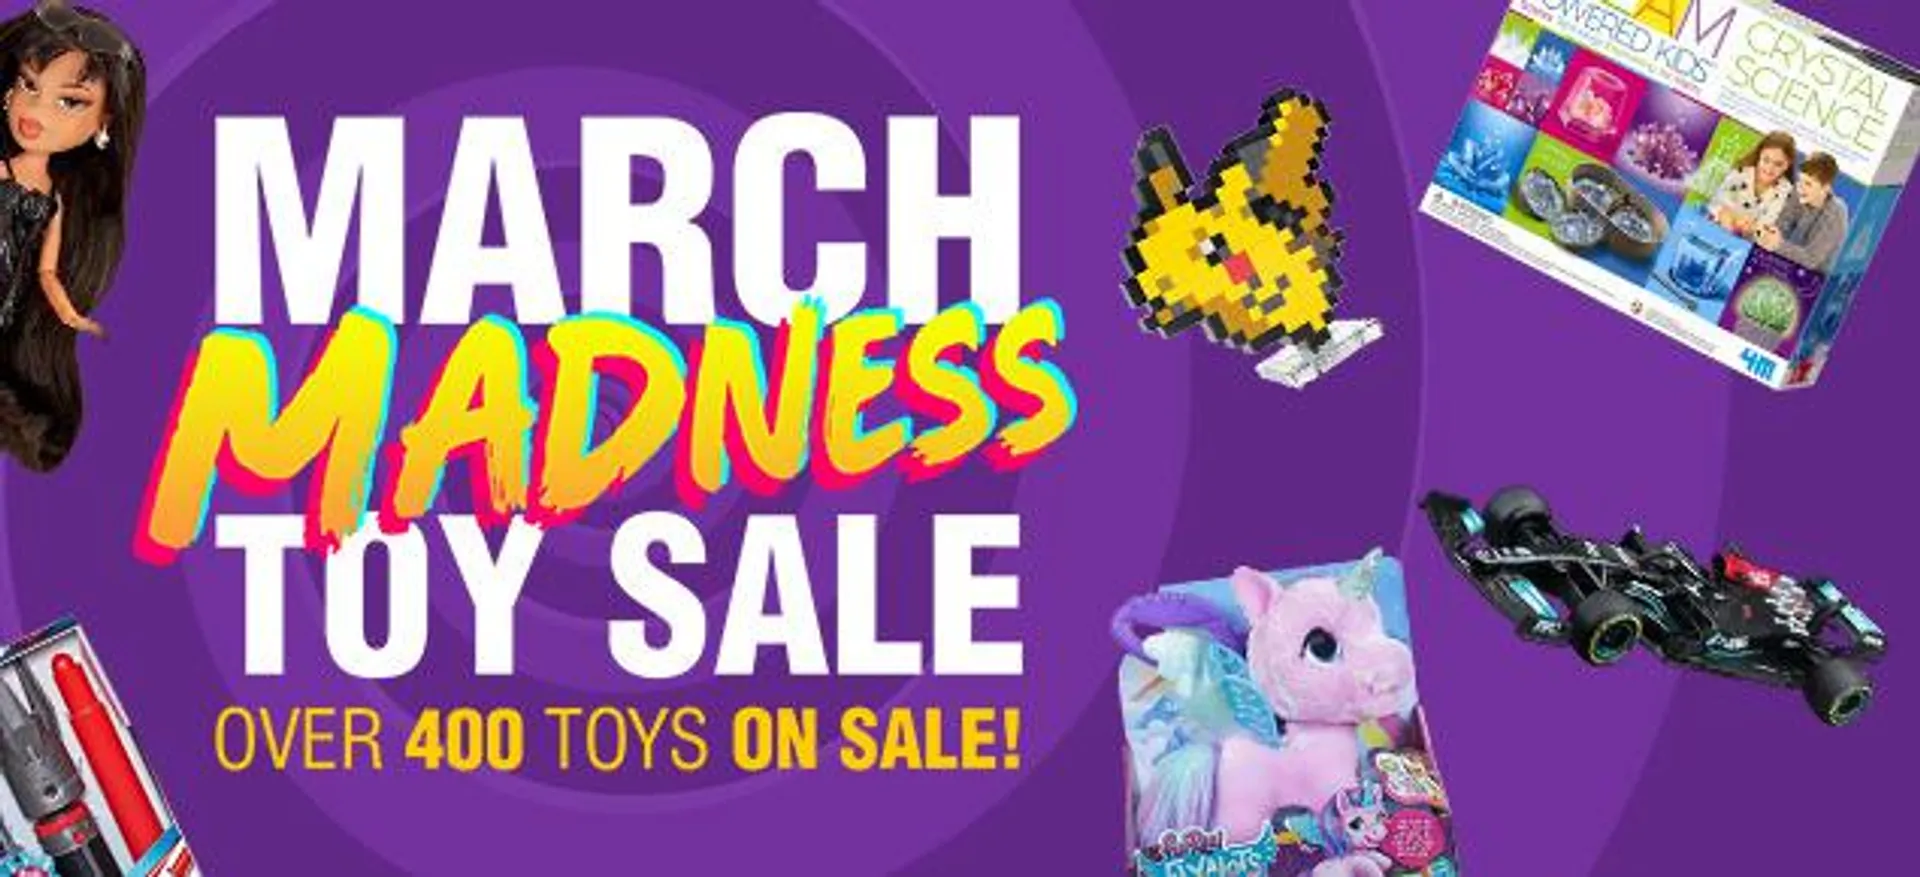 March Madness - Toy Sale!